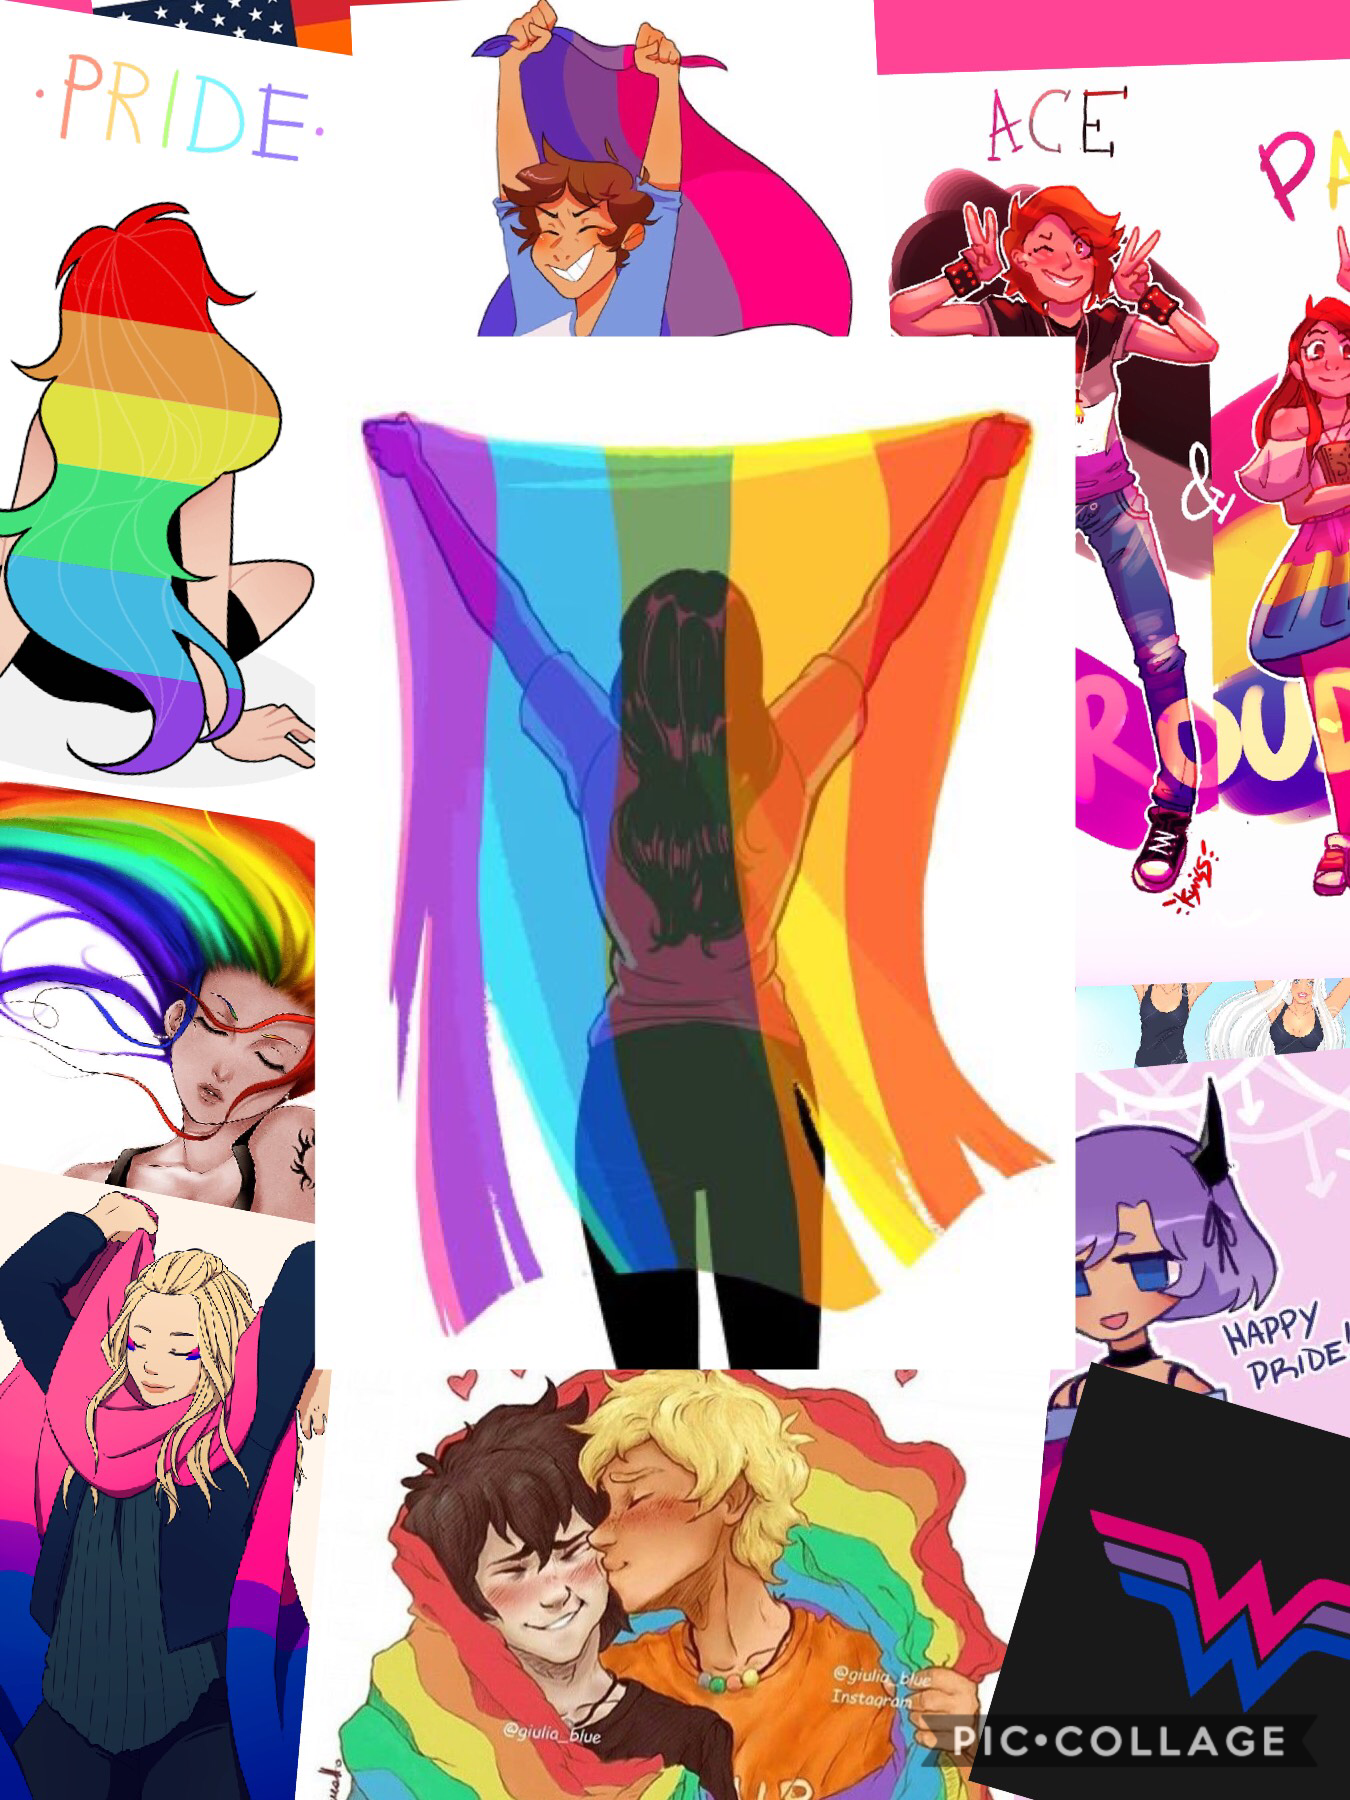 HAPPY PRIDE MONTH!! 👊🏳️‍🌈💜!!!! (3 month early but who cares? AIR? (Am I right?)) For those who didn’t see my last one.... IM BI AND STINKING PROUD AND OUT!! WHOOOOOOOOO! yay me